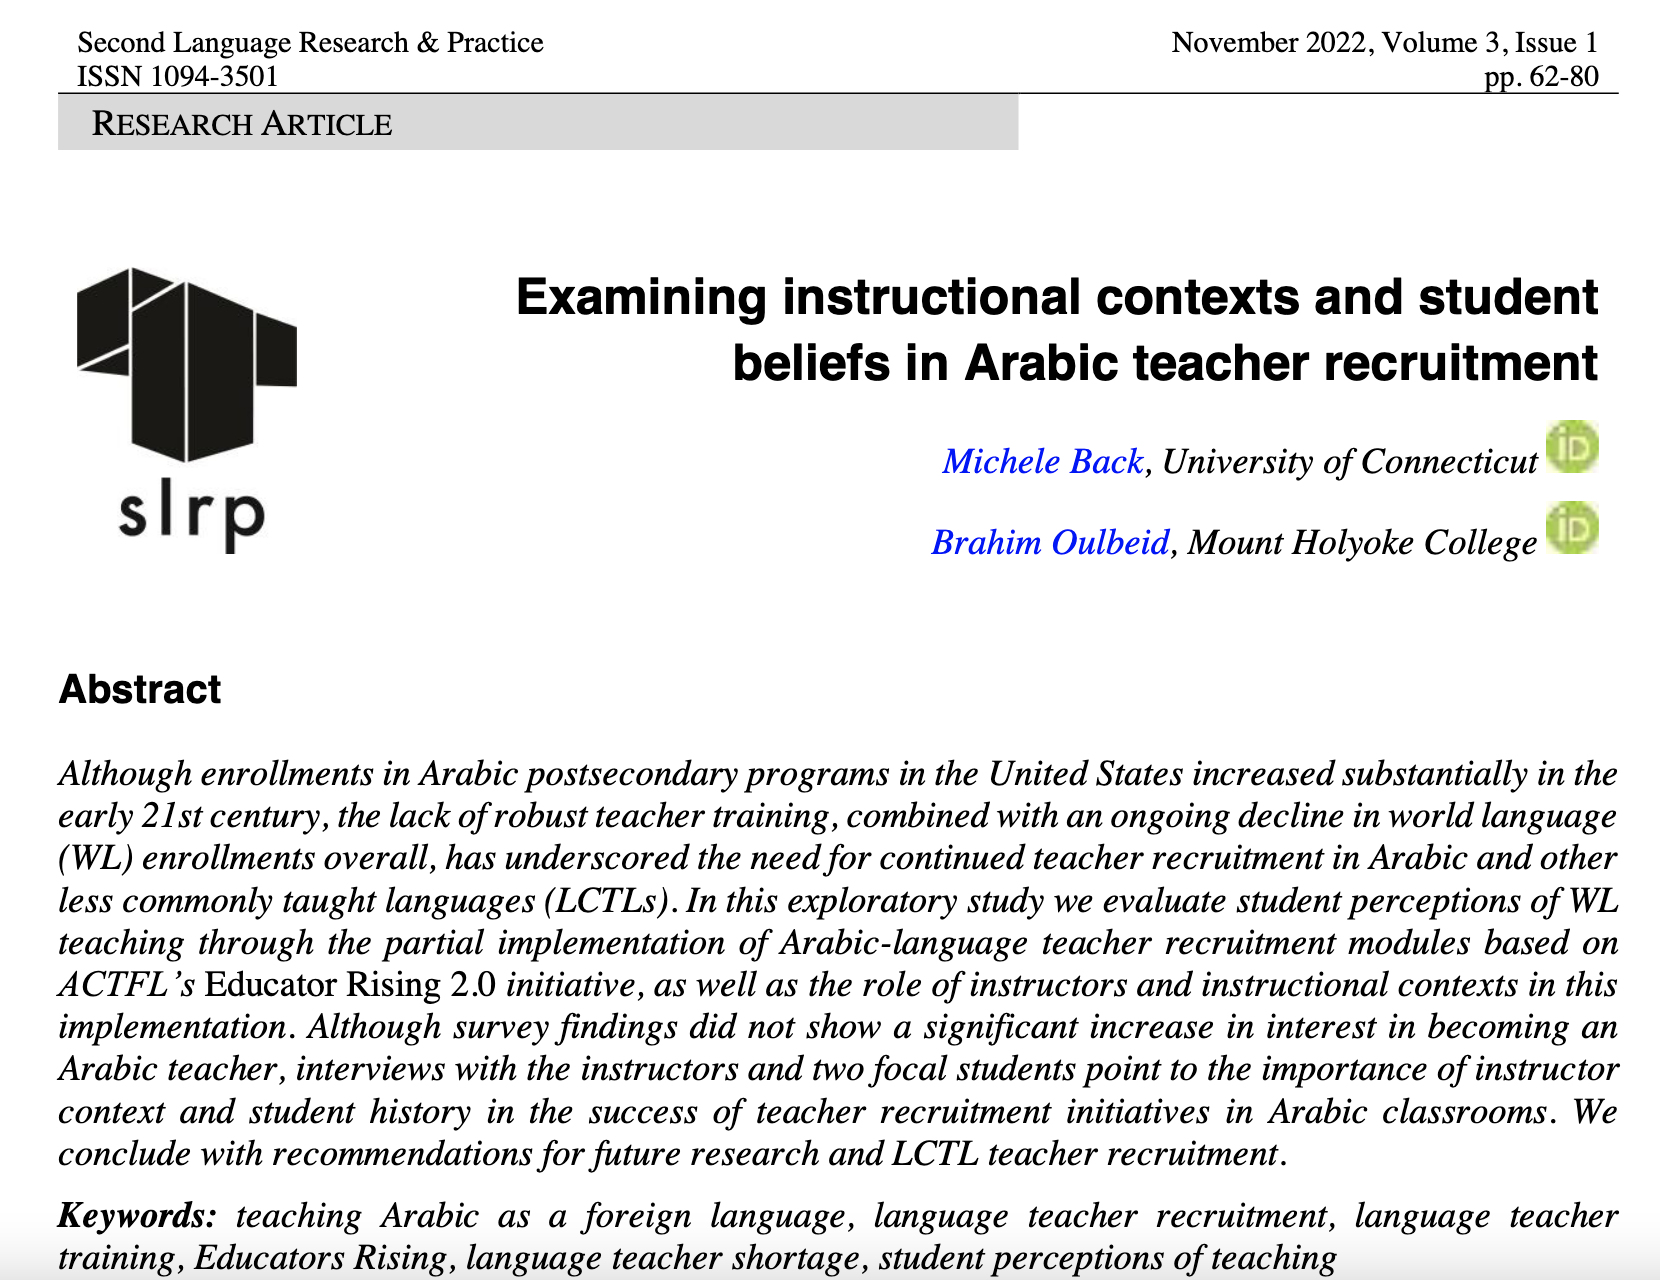 Abstract of the article Examining instructional contexts and student beliefs in Arabic teacher recruitment.